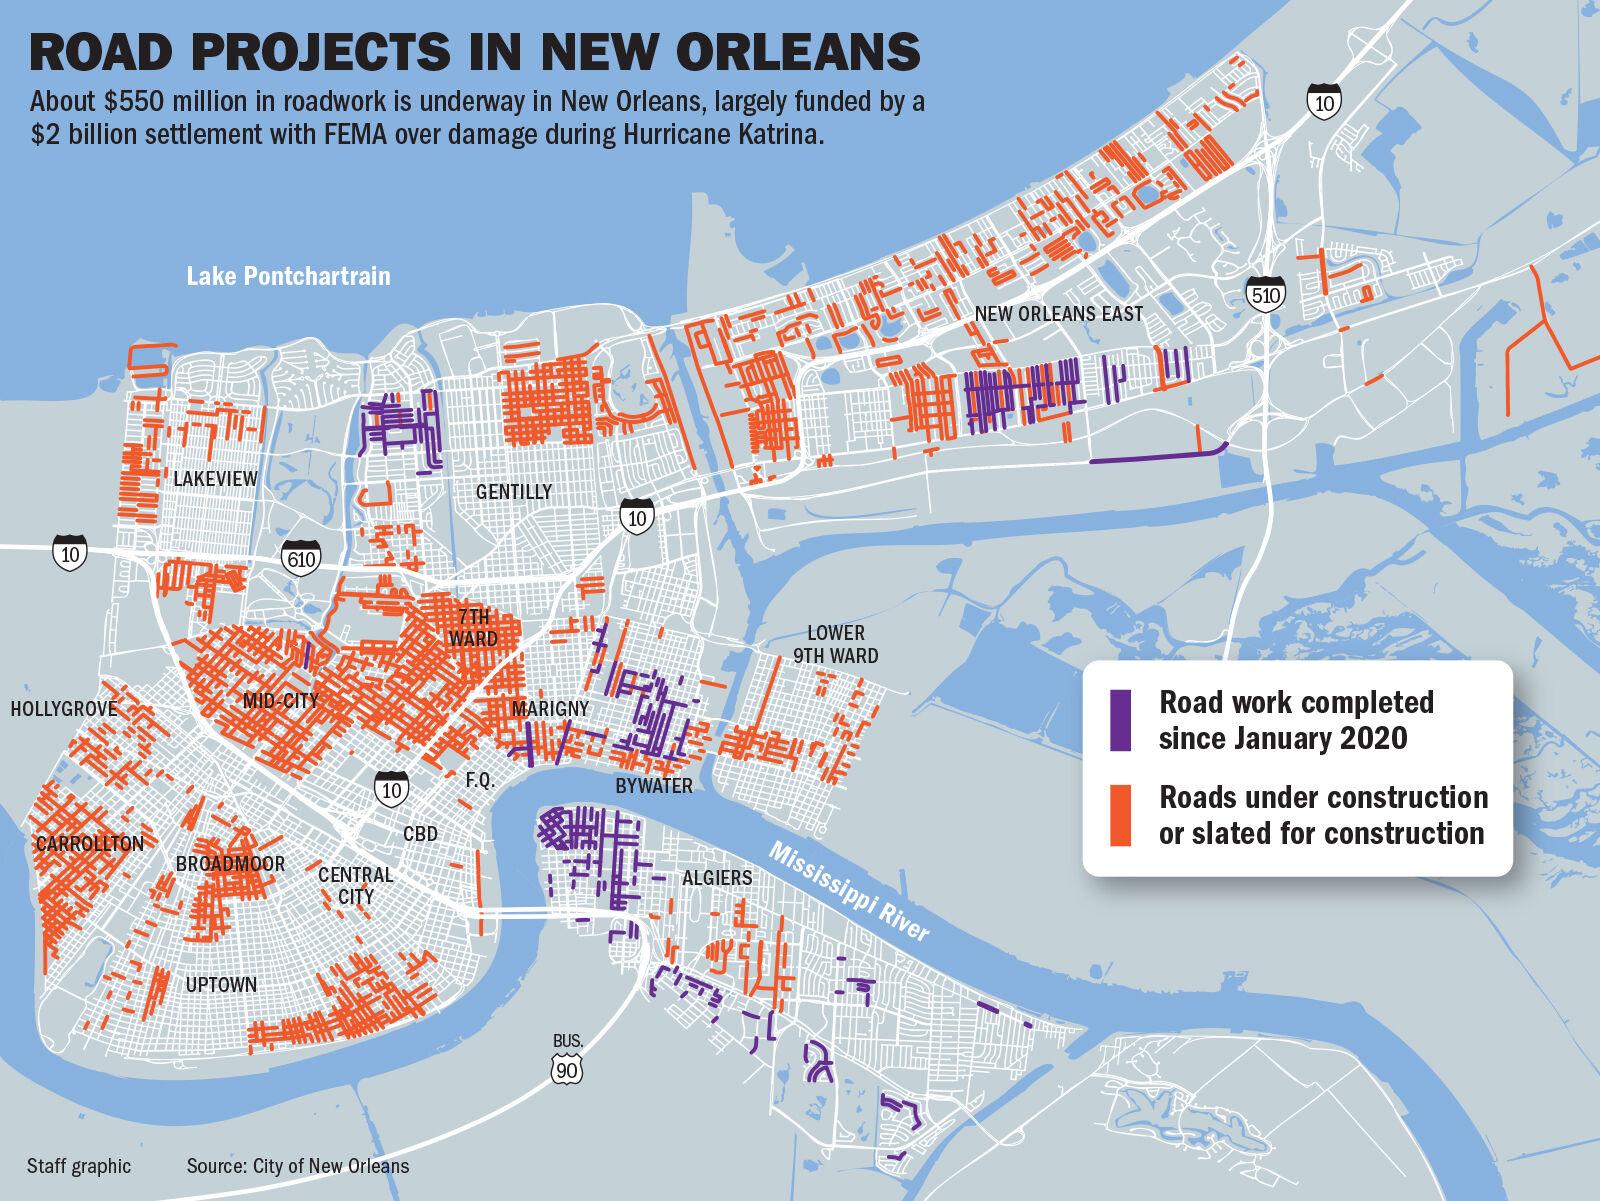 By 2025, many New Orleans streets will be rehabbed. For residents, the